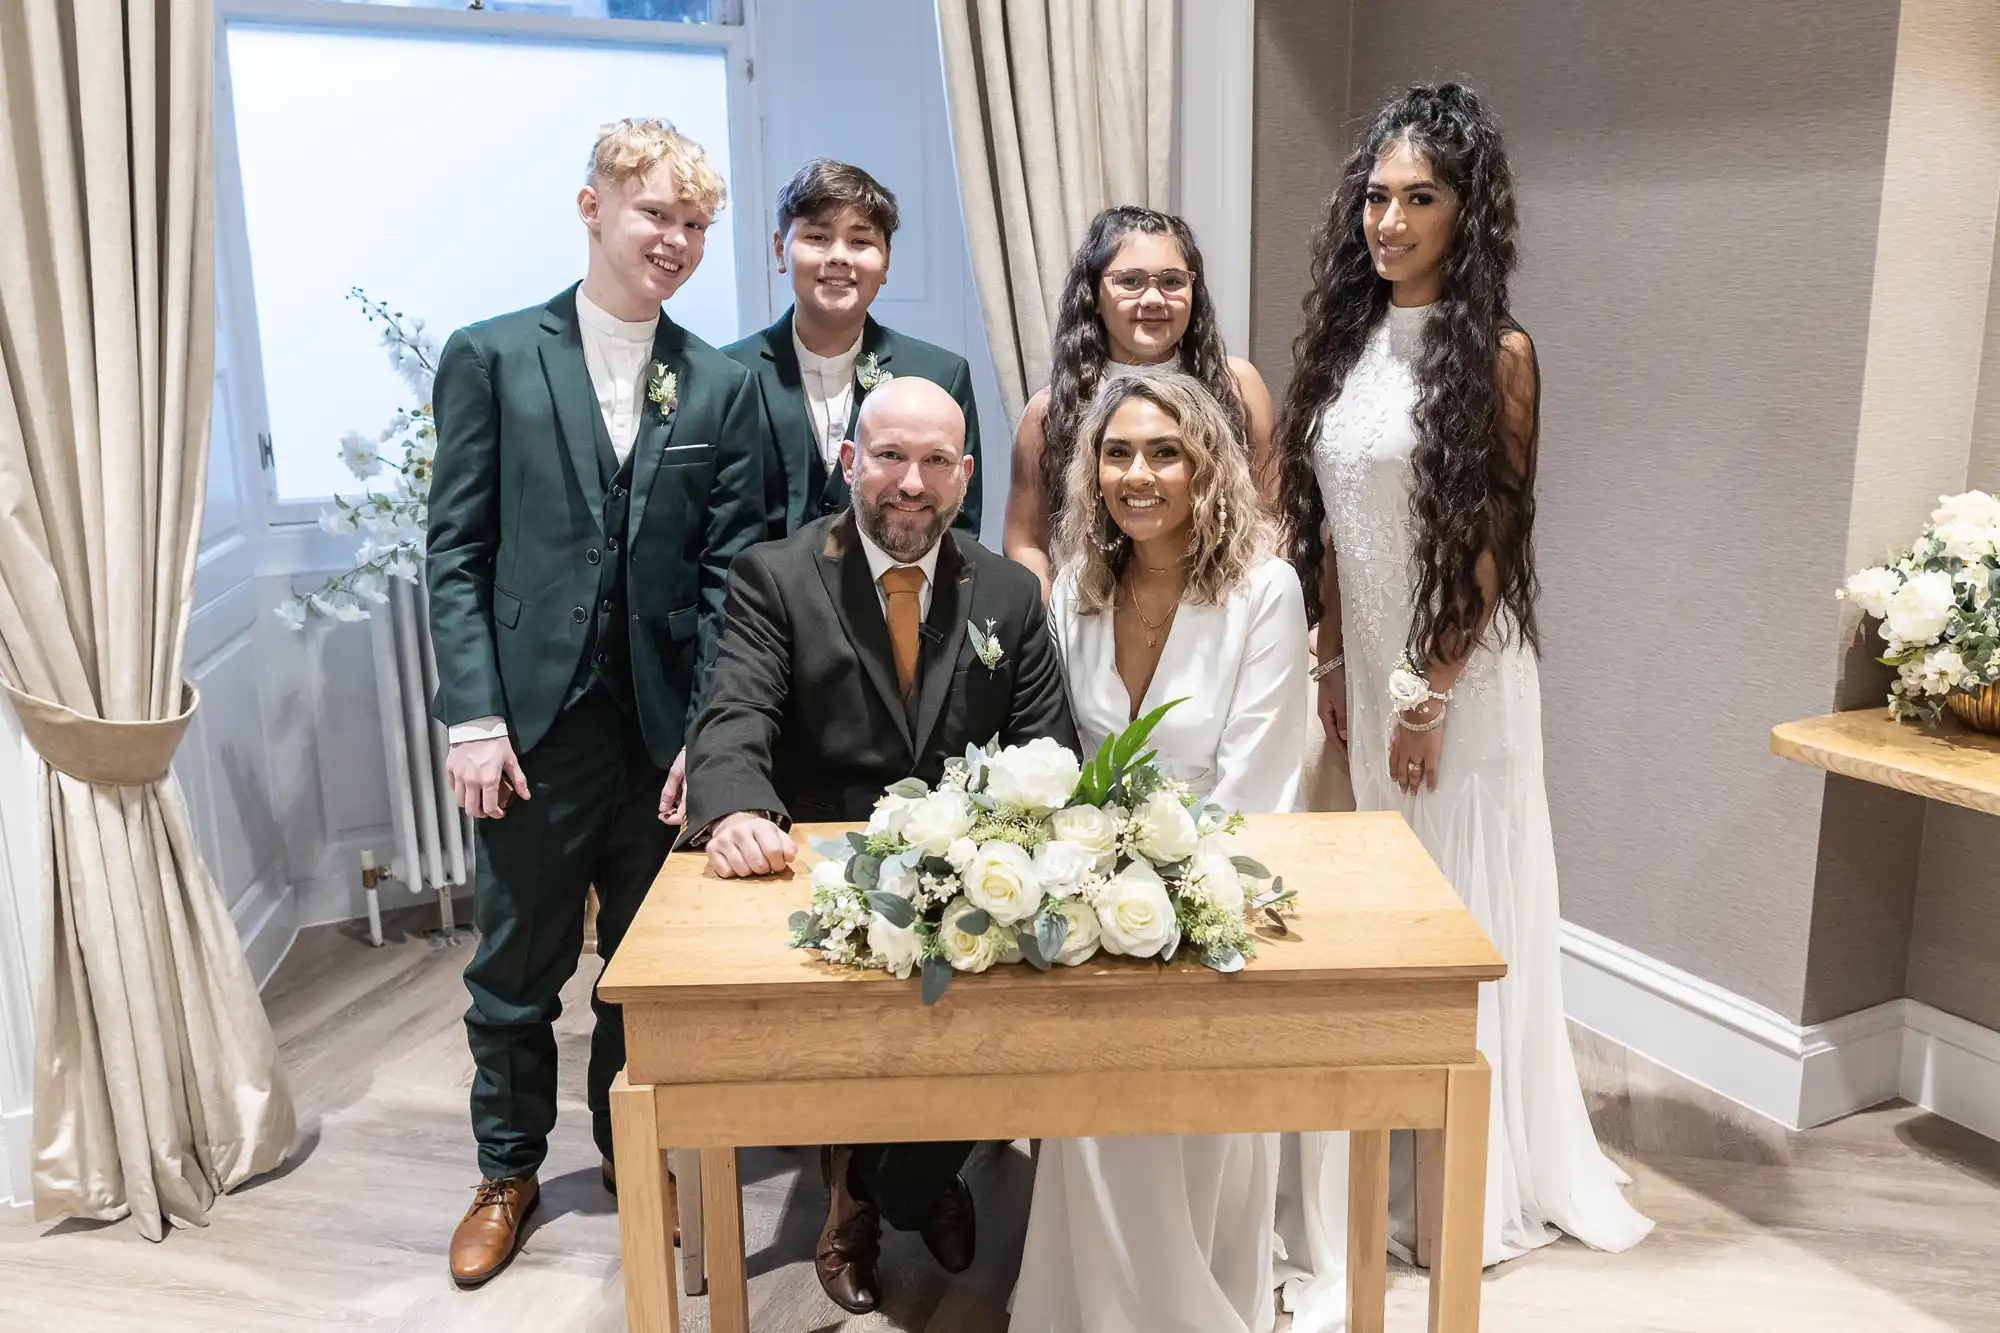 A group of six people posing for a photo in a room with a desk adorned with white flowers. A seated couple, presumably newlyweds, are surrounded by four individuals standing behind them.